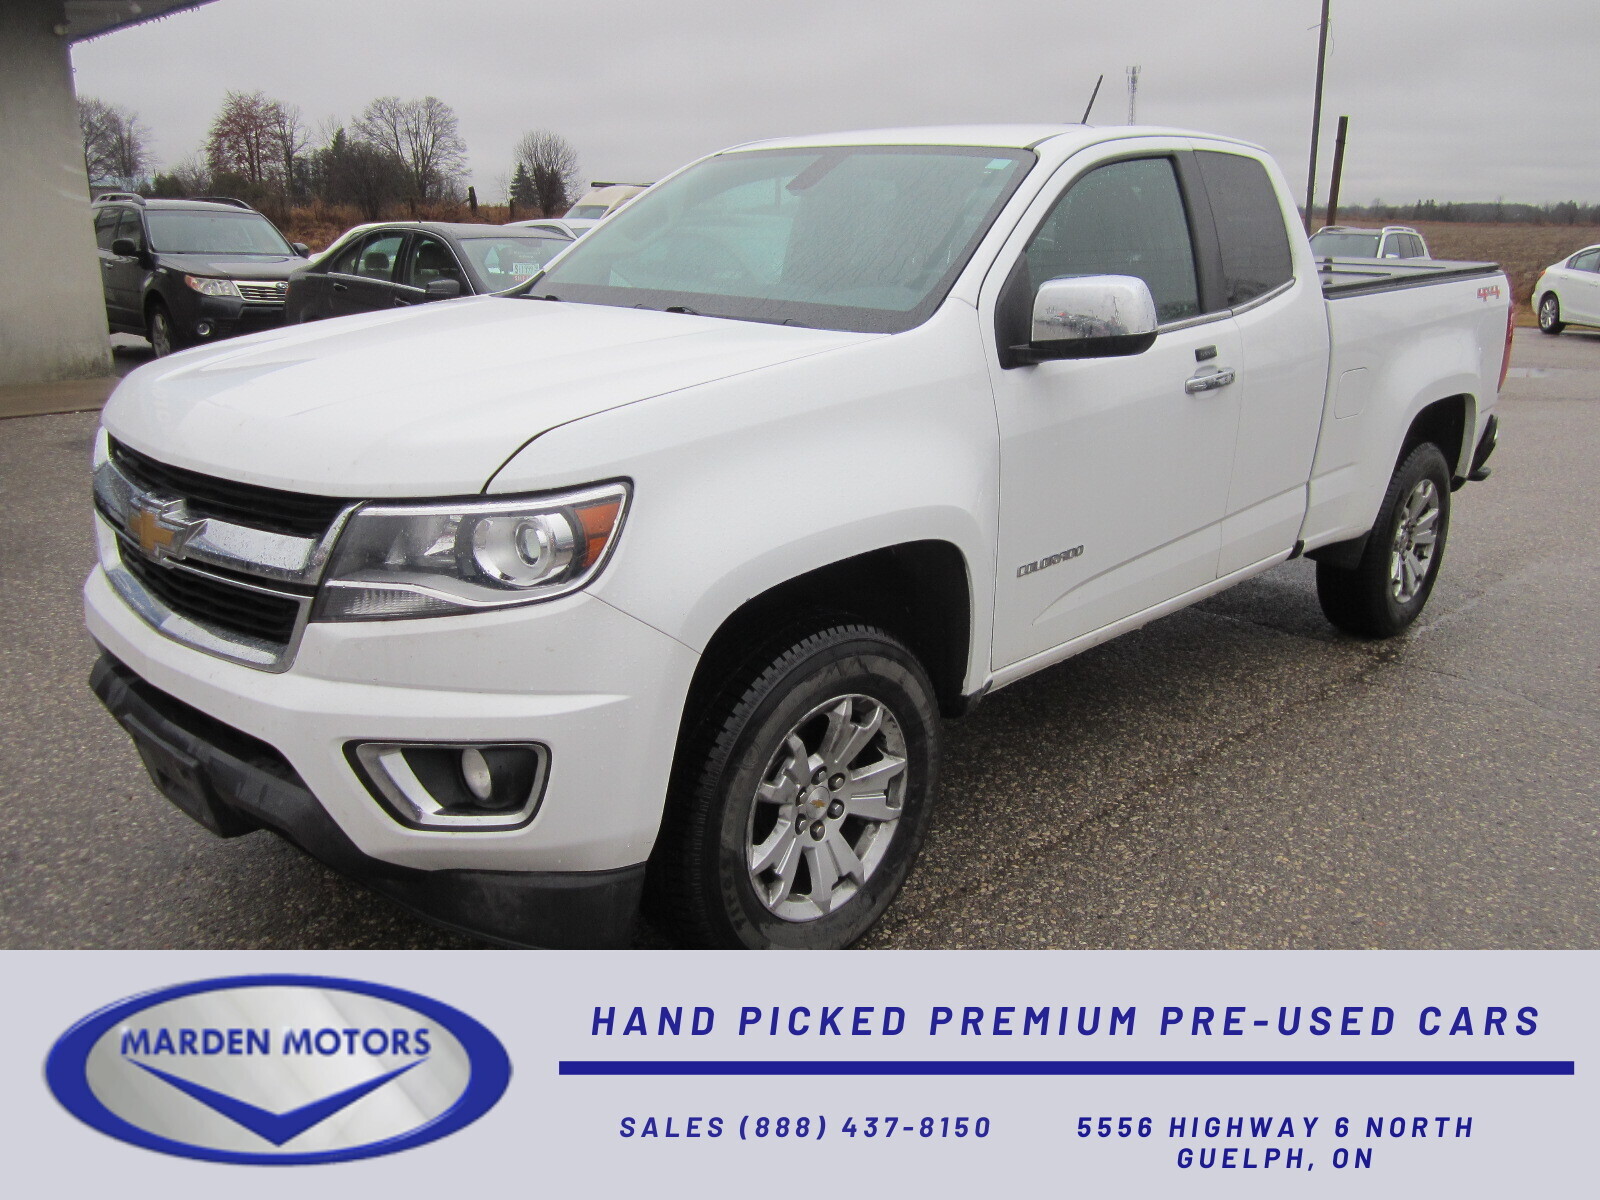 2019 Chevrolet Colorado LEATHER NAV NO ACCIDENTS ONE OWNER LT 4X4